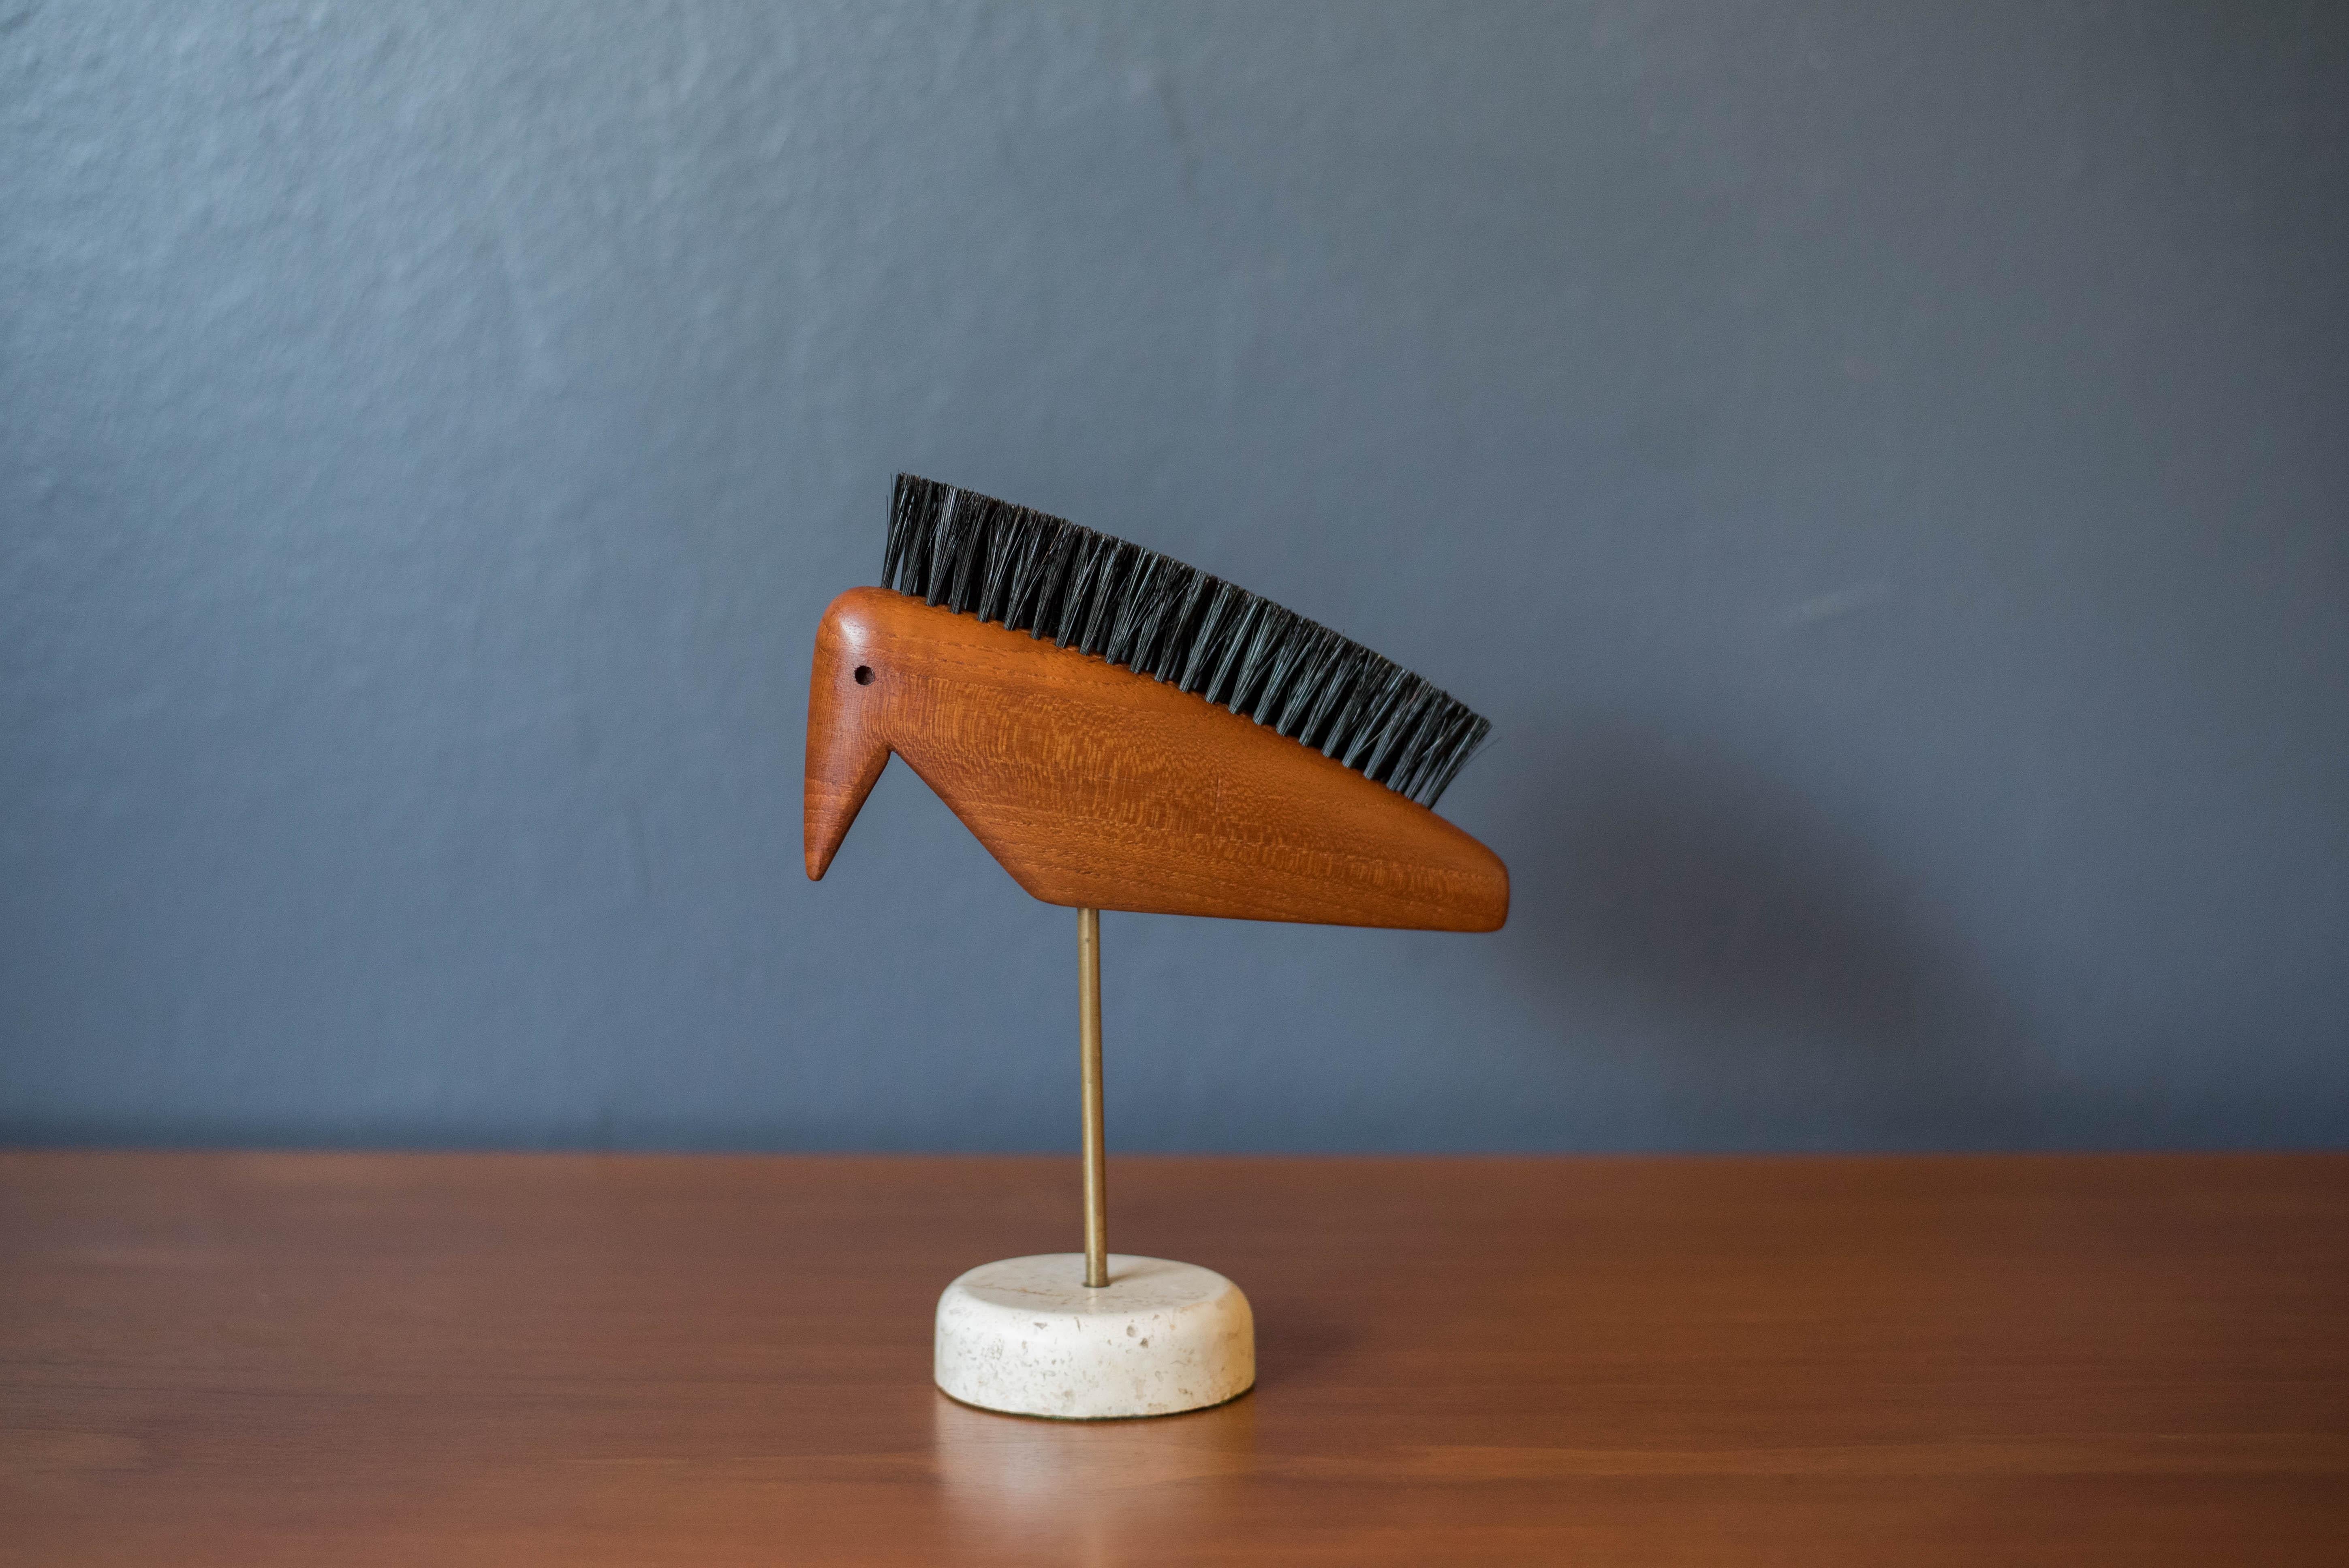 Vintage Danish modern abstract animal bird shoe brush in teak, circa 1960's. This piece has been very well kept and includes the hair bristles for cleaning. Sculpture is displayed on a travertine stone base. 